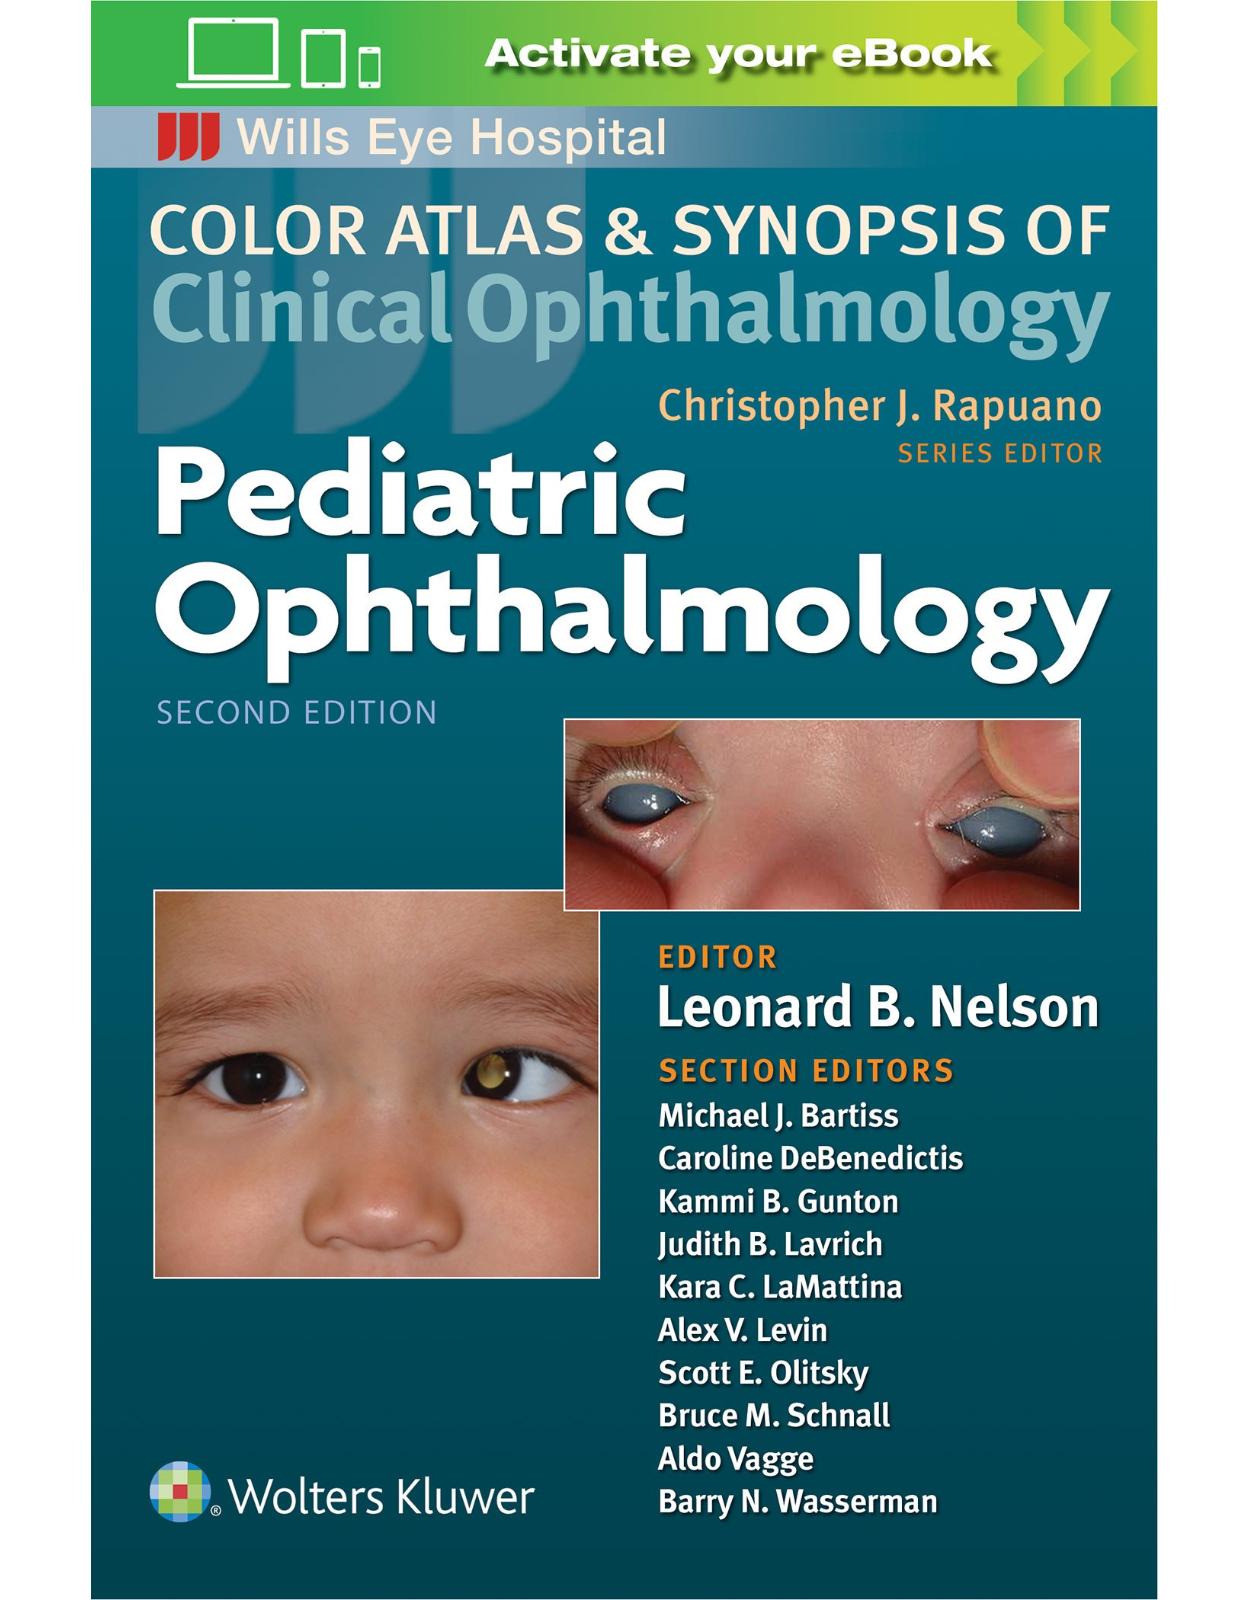 Pediatric Ophthalmology (Color Atlas & Synopsis of Clinical Ophthalmology)